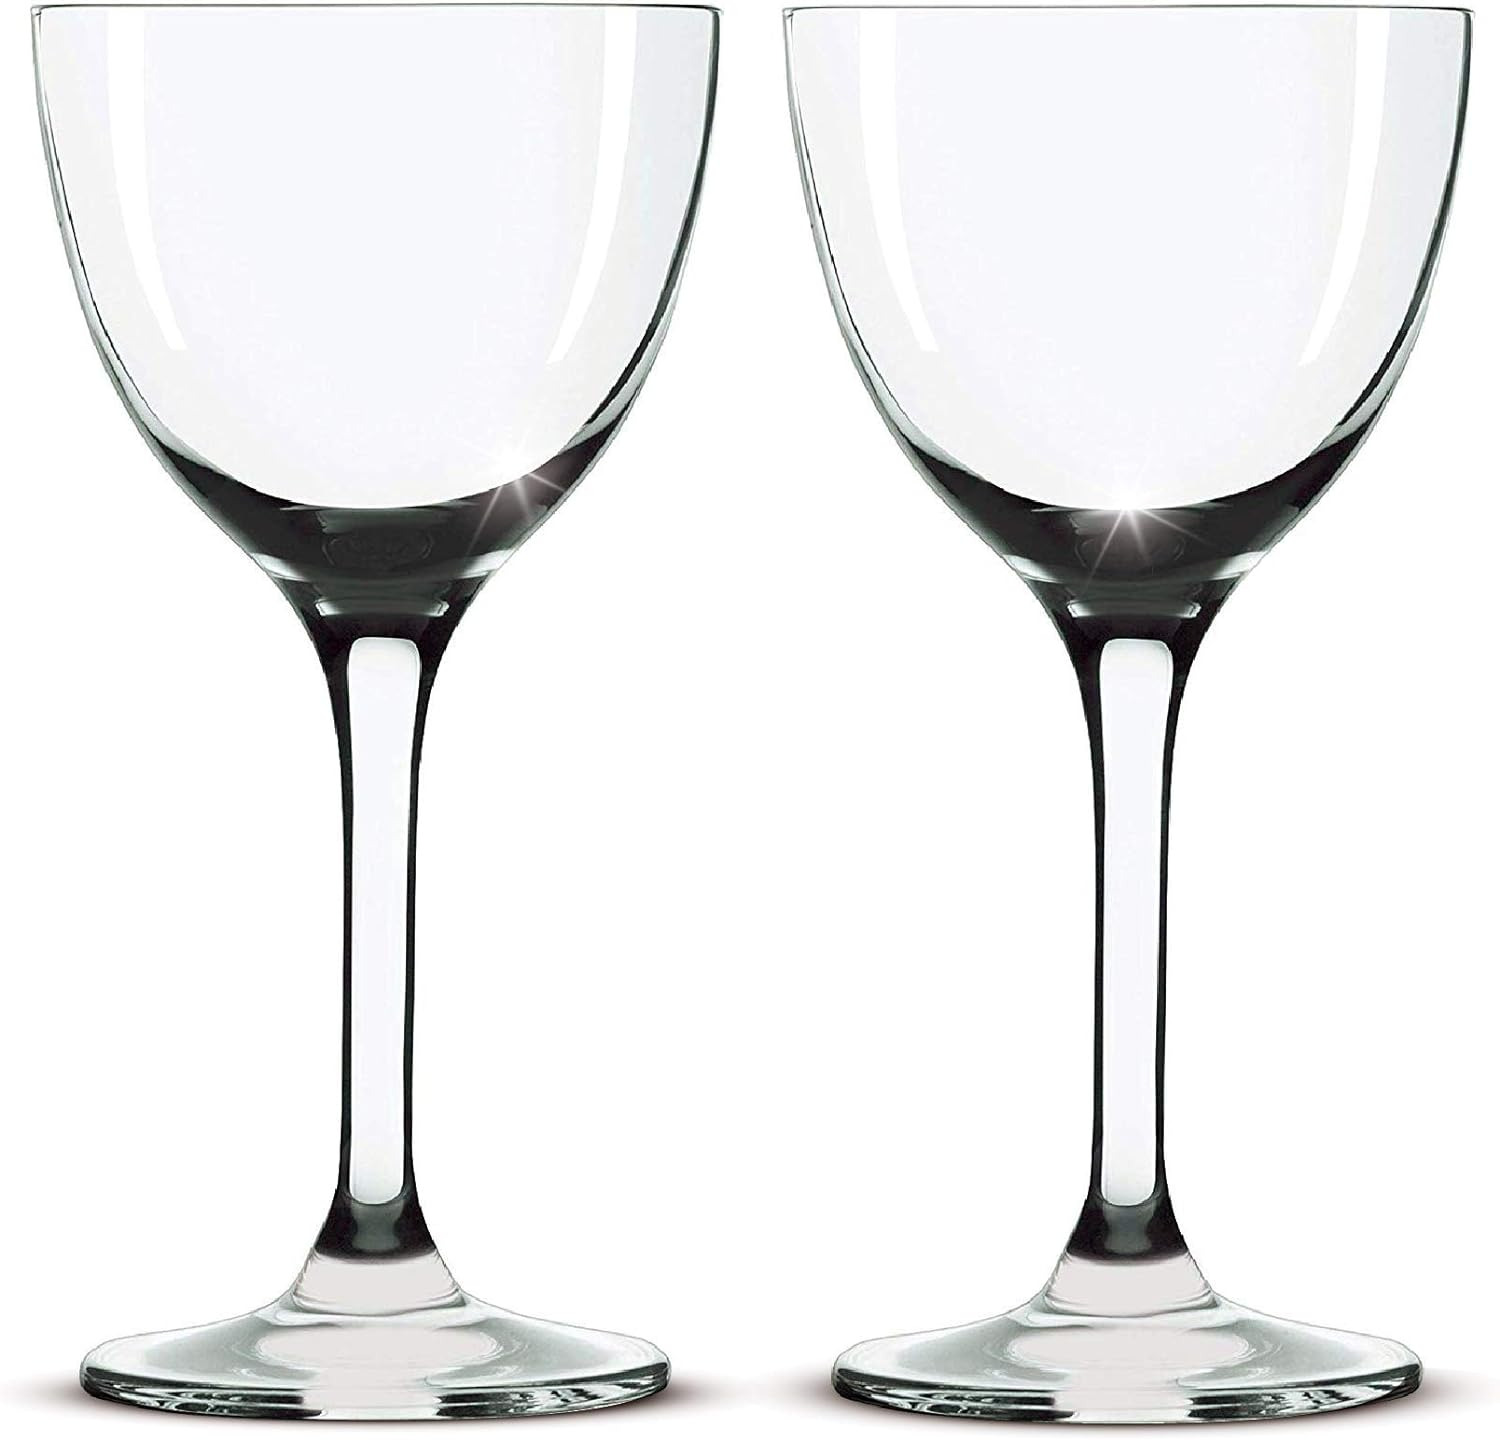 Nick and Nora Coupe Cocktail Glasses - Handblown Set of 2, 5-Ounce 